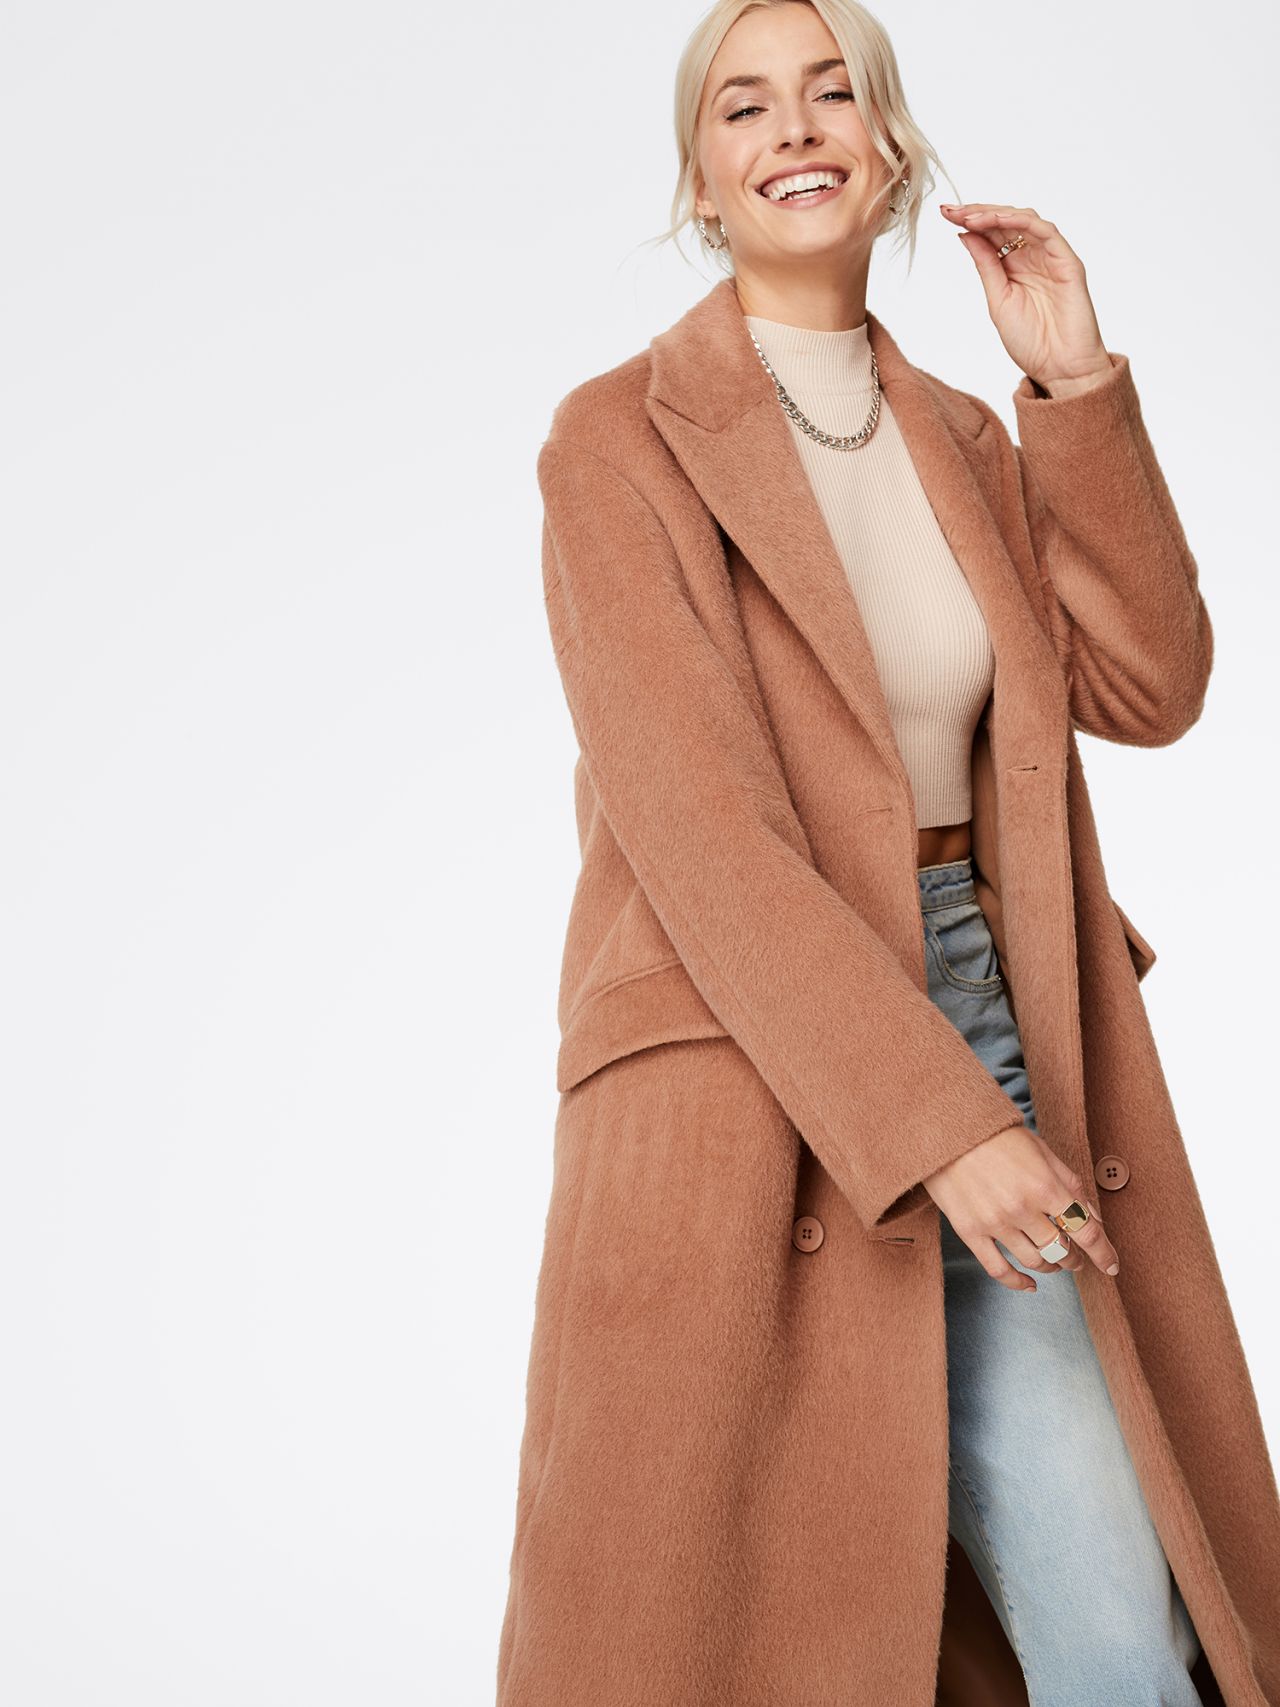 Lena Gercke Leger By Lena Commerce Collection Winter 2019